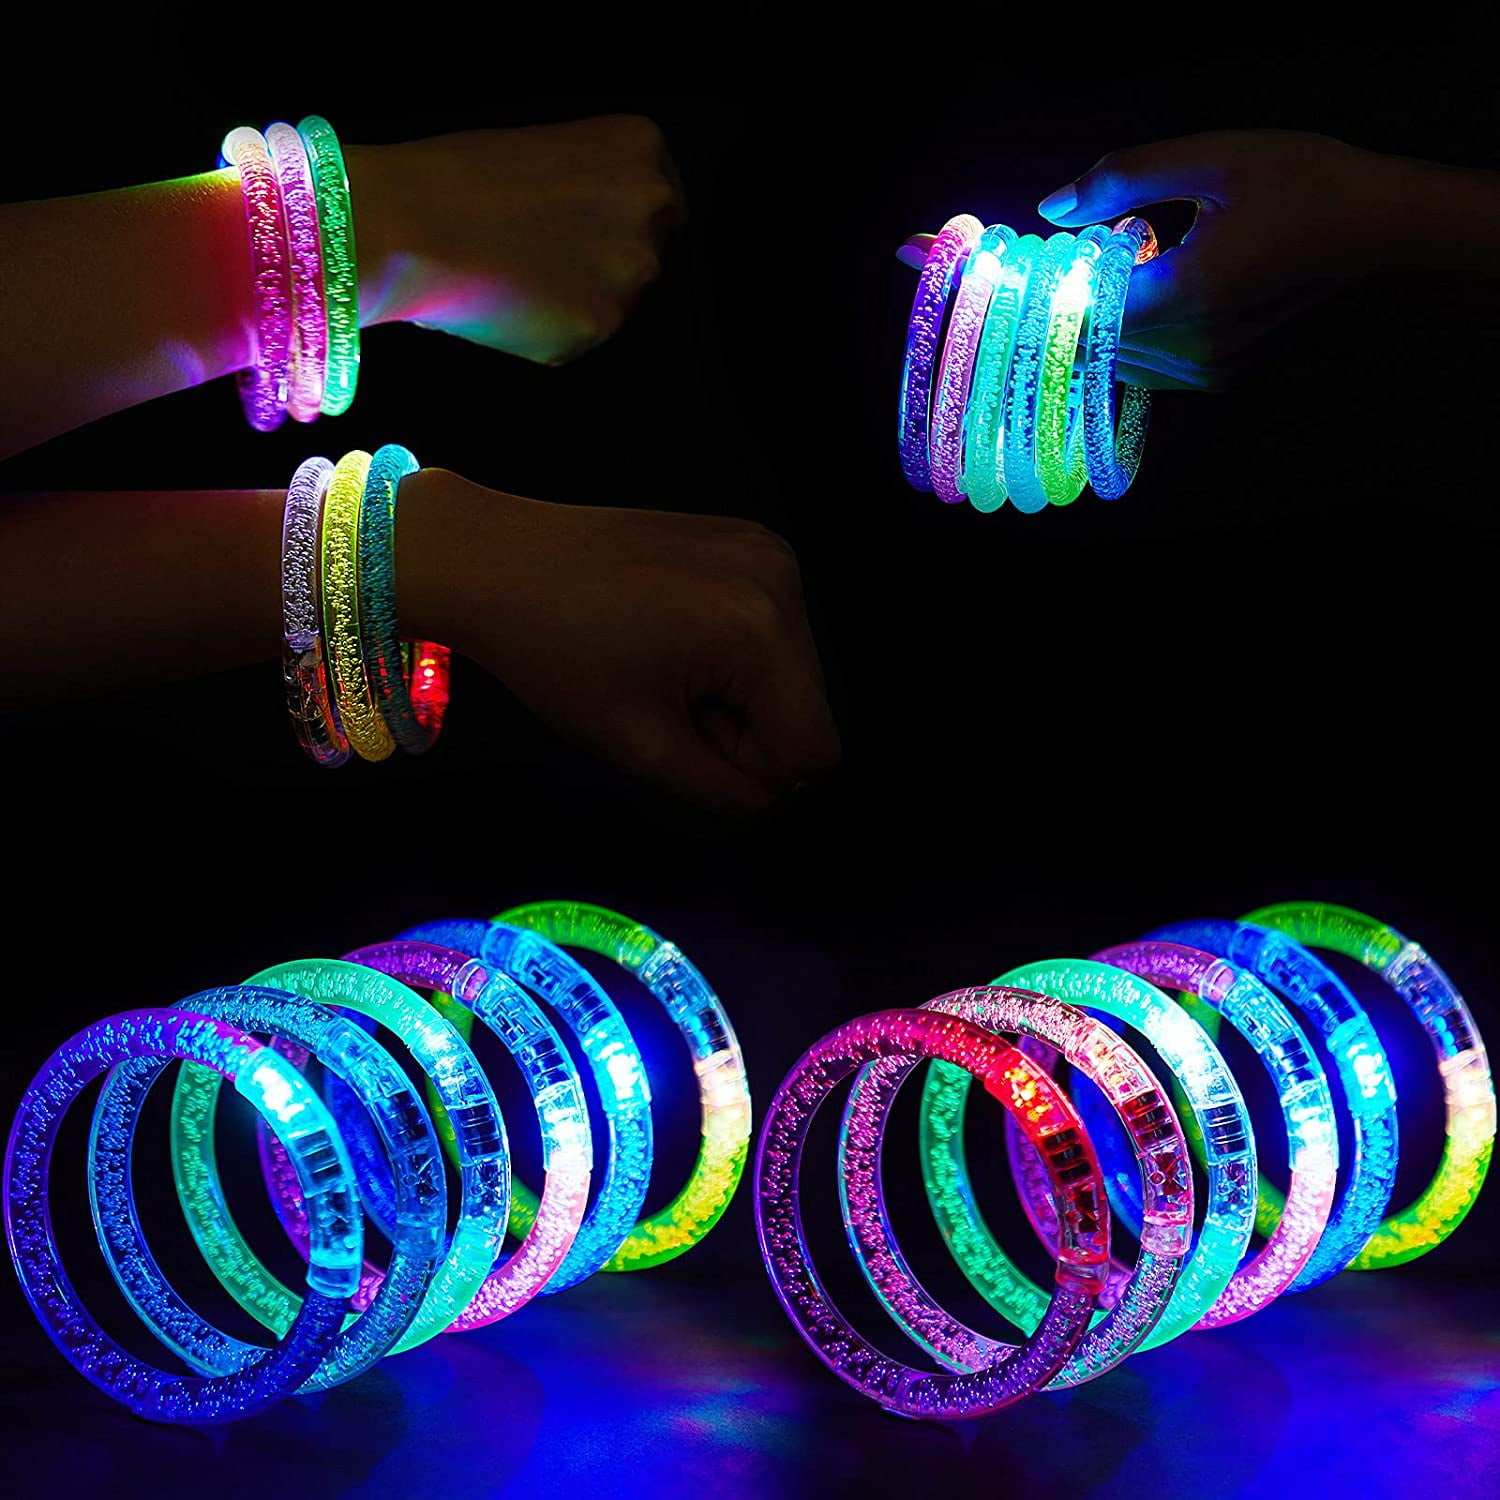 12 New Glow In The Dark Light-Up Neon Party Bracelets | Michaels